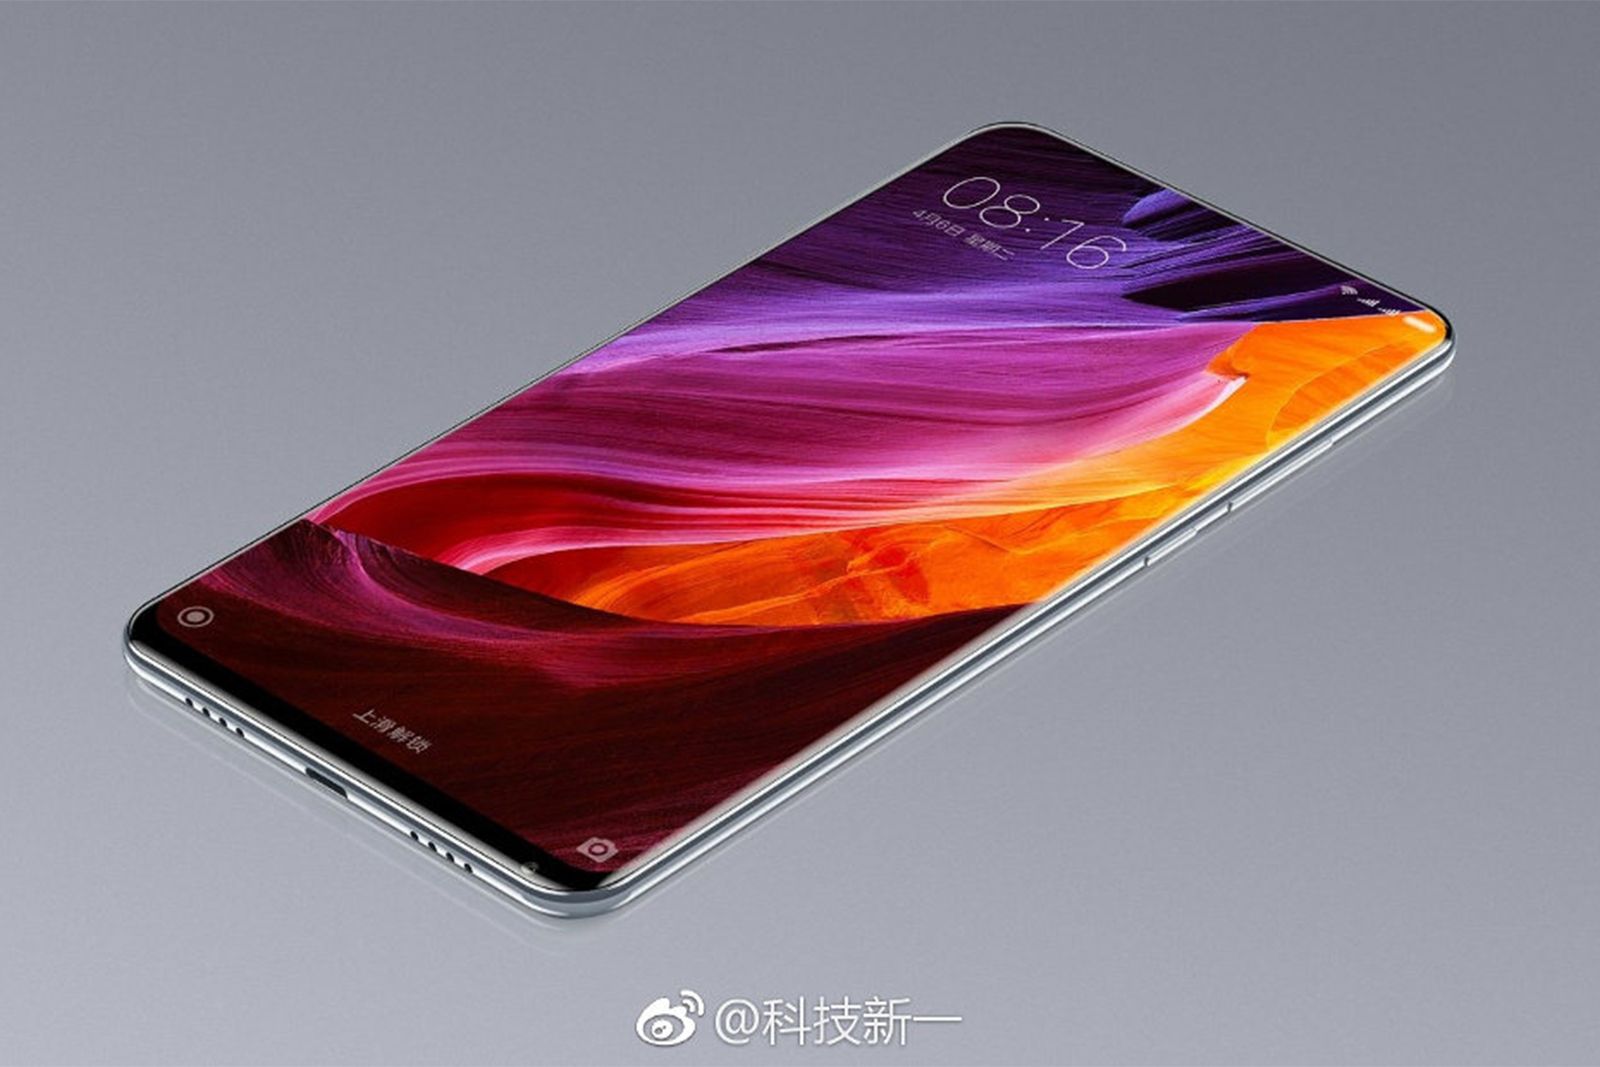 Xiaomi Mi Mix 2 may be a completely bezel-free phone image 1